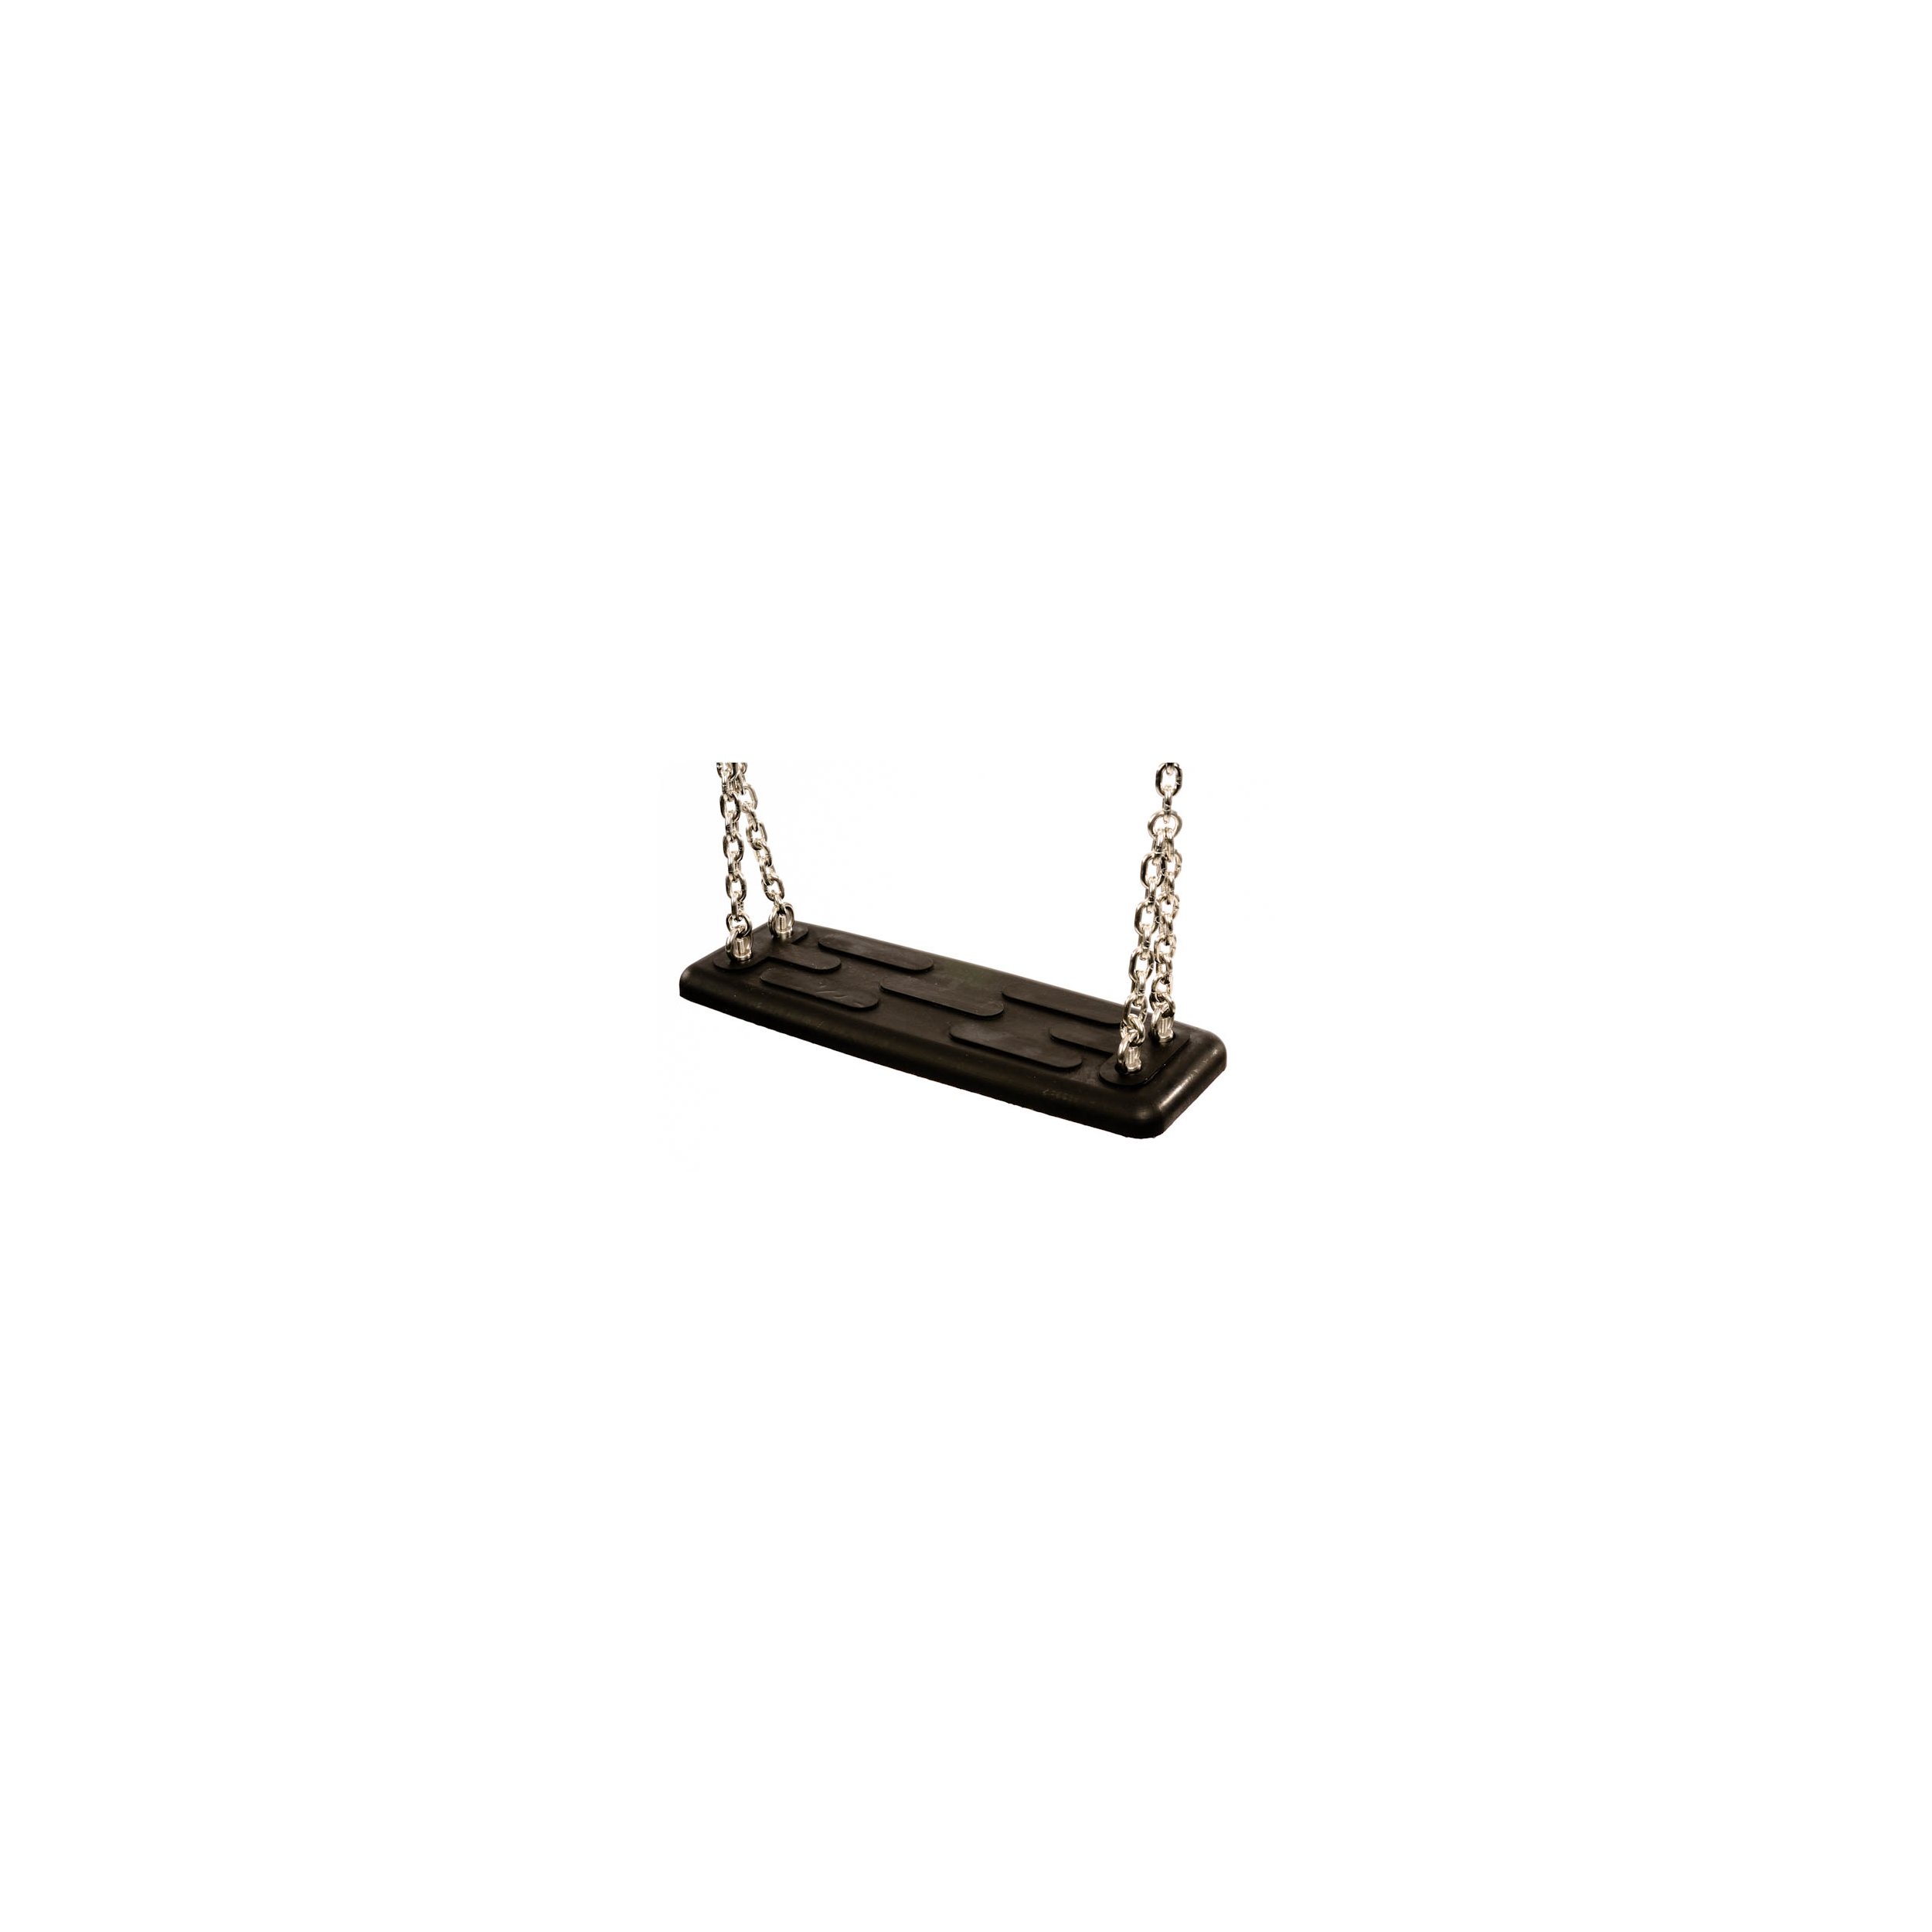 Commercial safety rubber swing seat type 1A black Hot-dip galvanised 250 cm